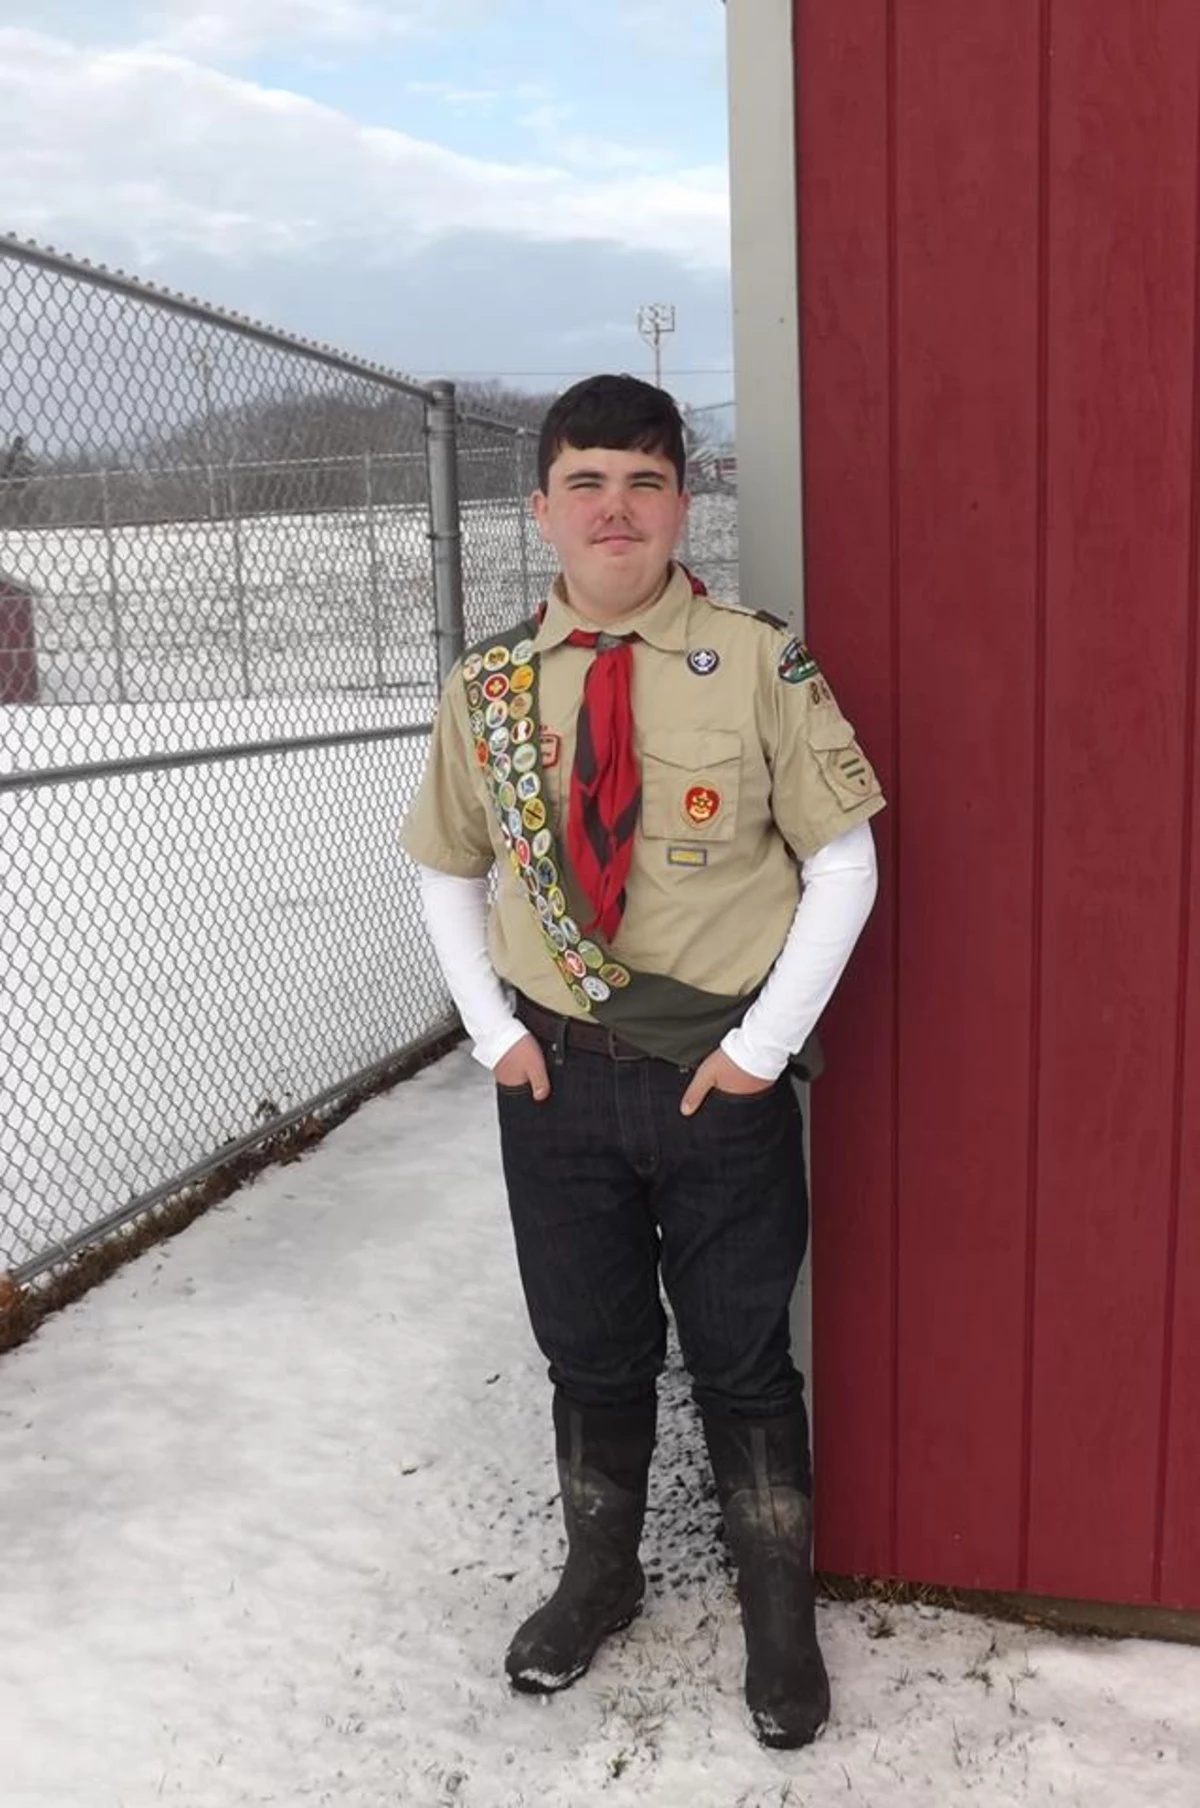 Hutchins Completes Eagle Scout Project at Ellsworth Elementary-Middle School1200 x 1808